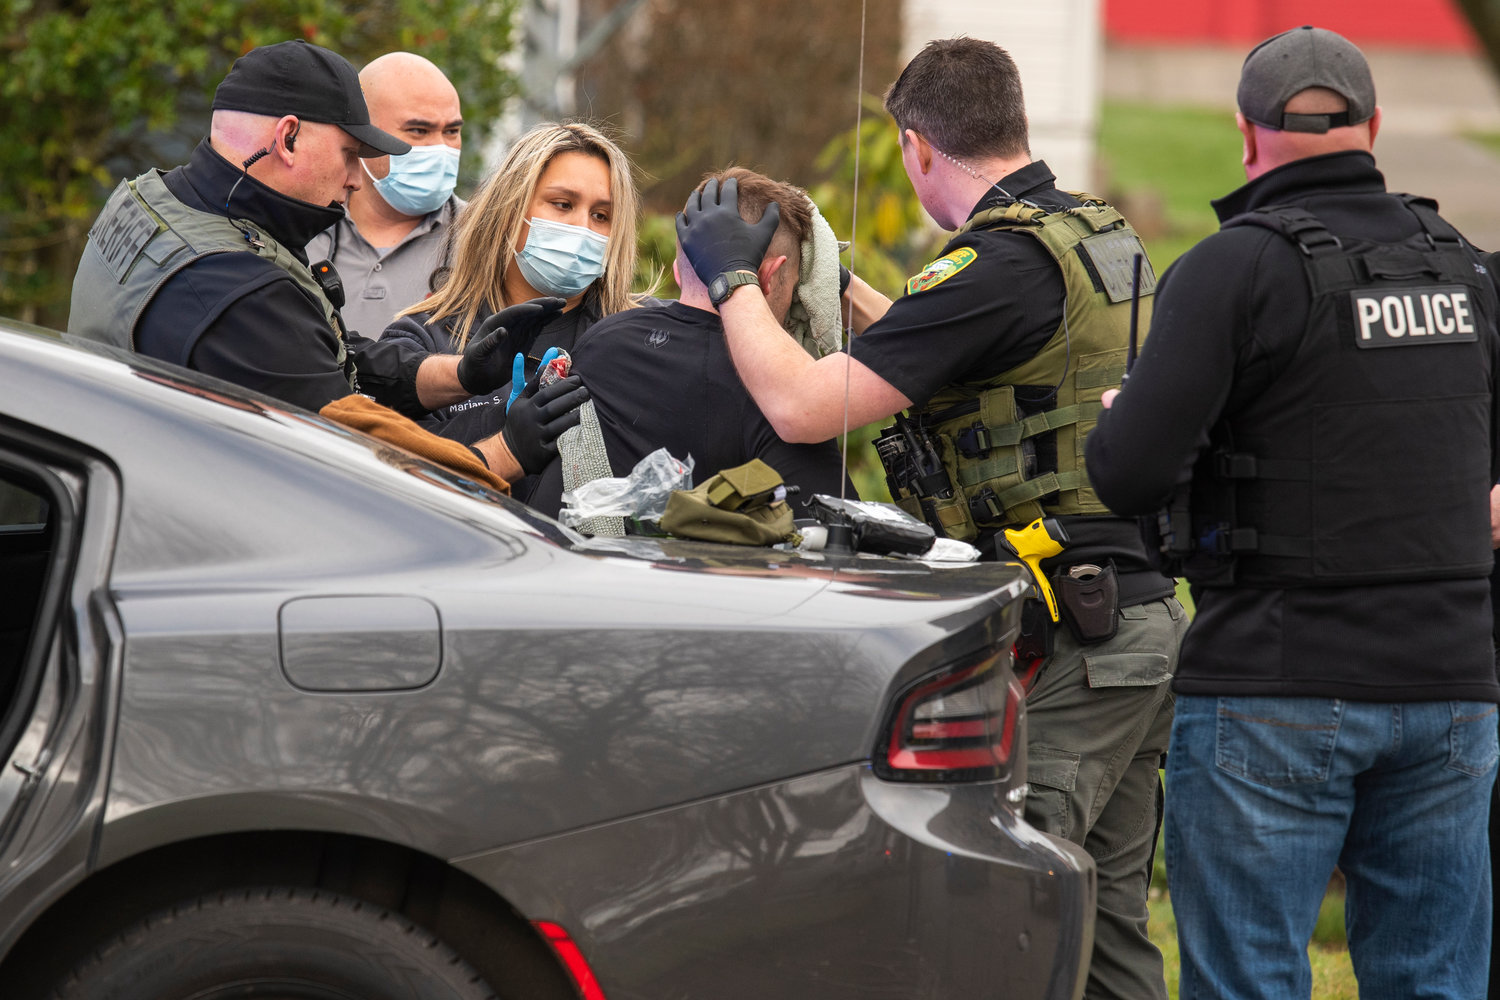 Centralia K9 Officer Stephen Summers is treated for injuries and helped into the back of an ambulance in the 100 block of Southwest Alfred Street in Chehalis after responding to a call.